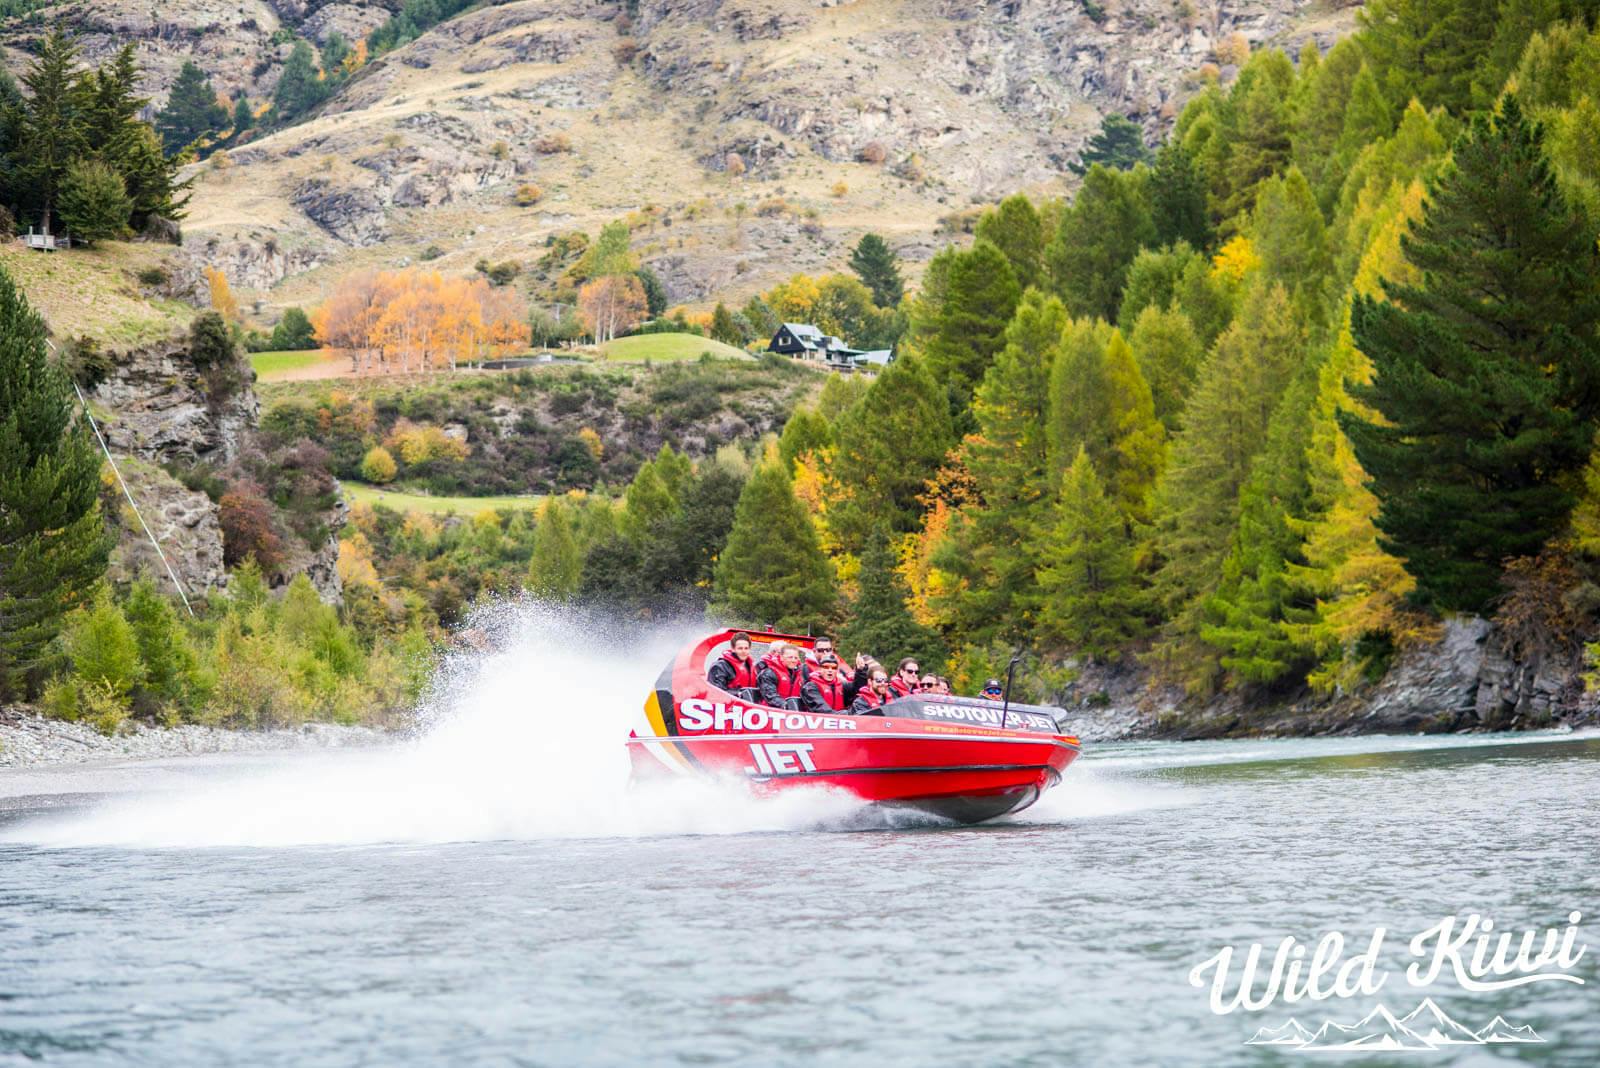 Heart pounding action on the water - Ride in a jet powered boat